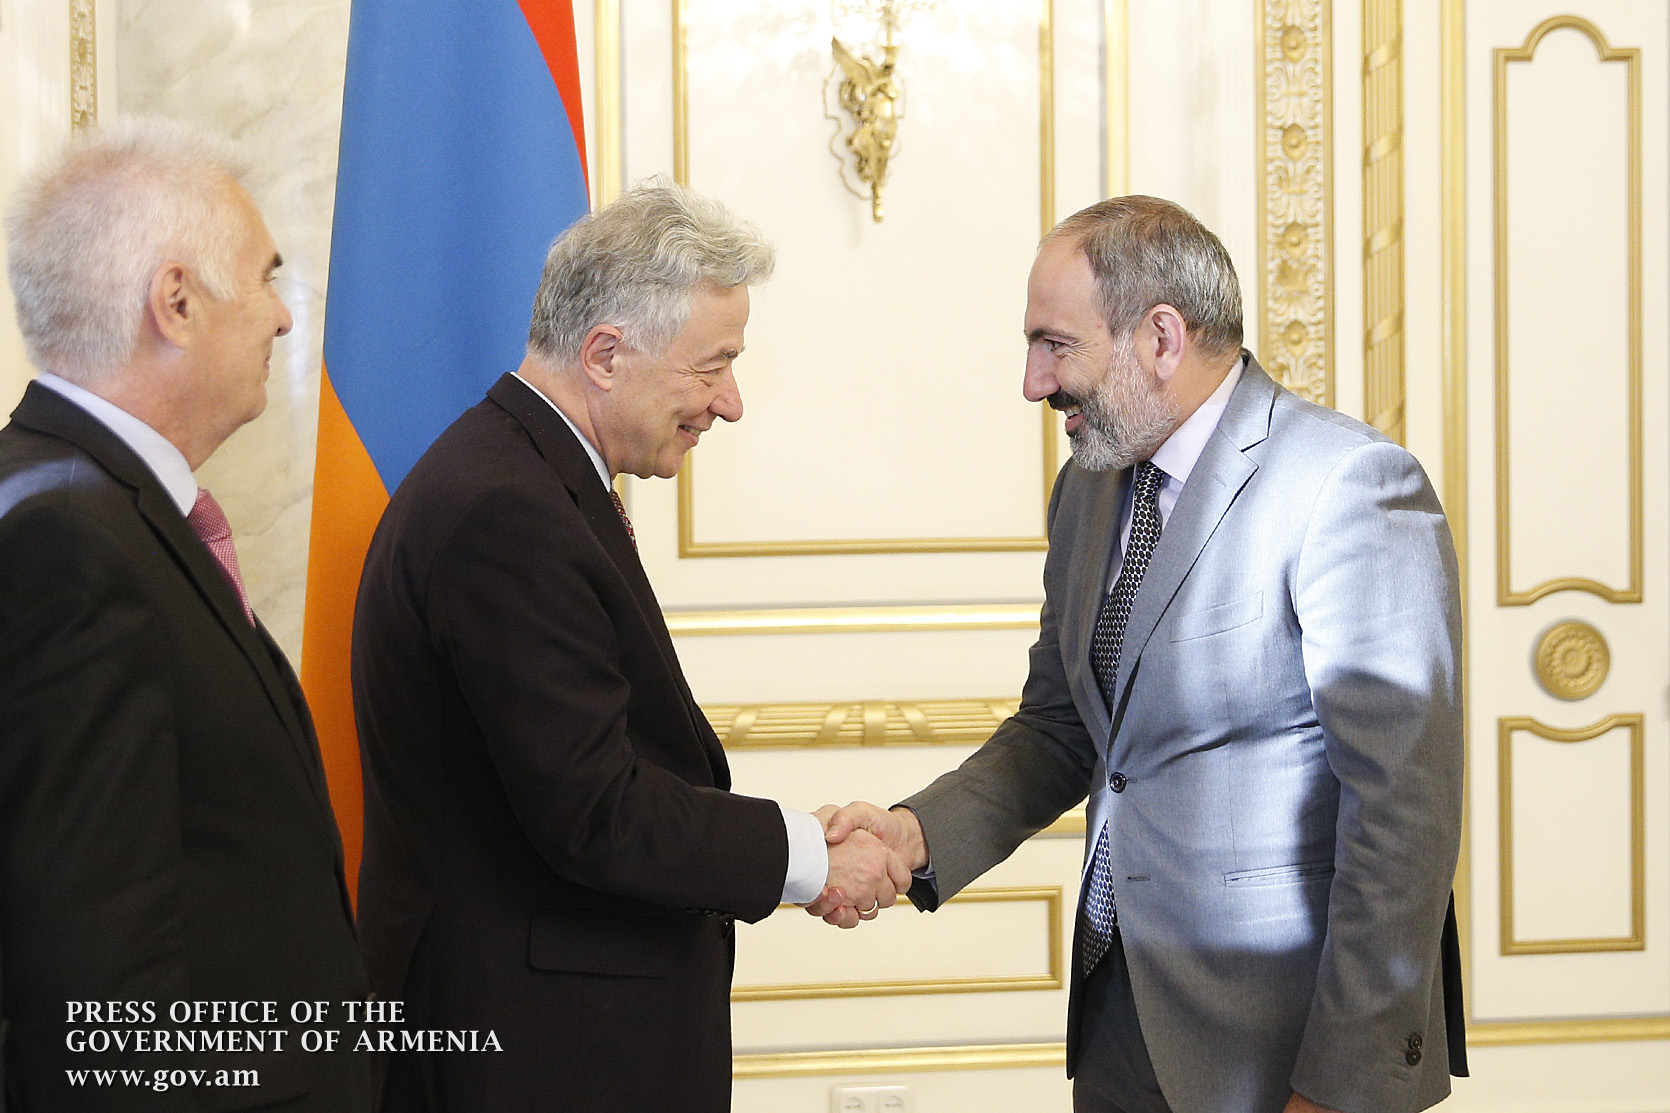 Nicol Pashinyan receives Thomas Mayr-Harting, EEAS Managing Director for Europe and Central Asia